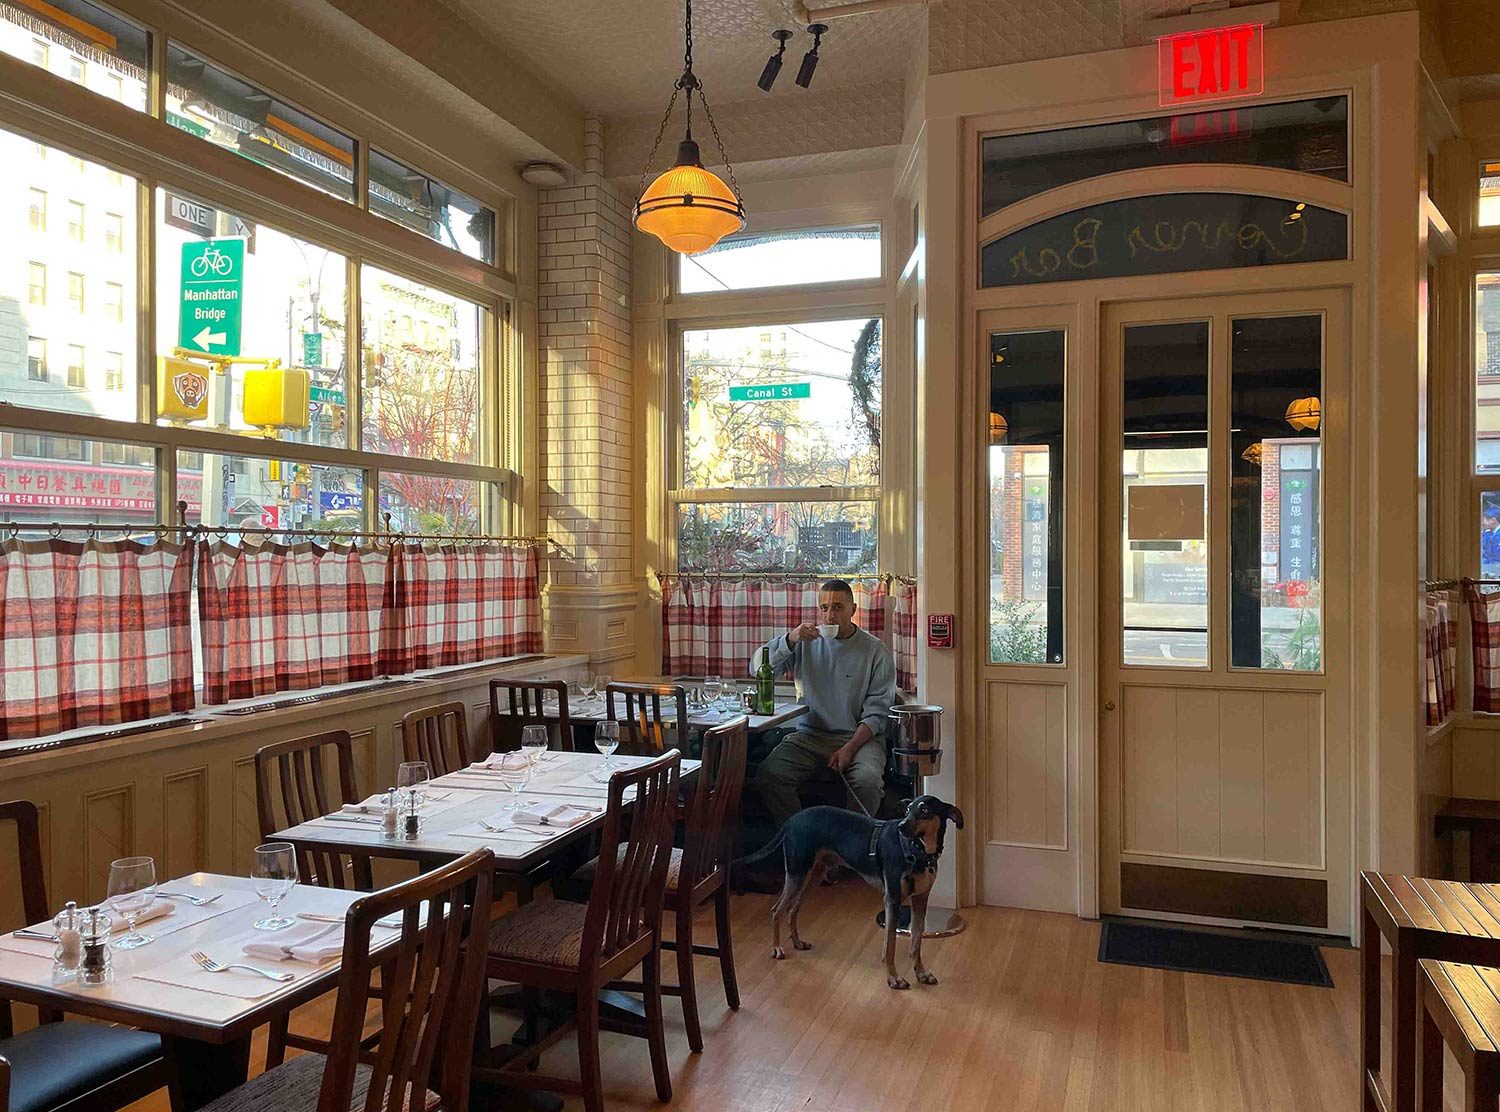 Nine Orchard Quiet mornings at the Corner Bar, where celebrated local chef Ignacio Mattos (Estela, Altro Paradiso, Lodi) serves renditions of classic dishes from breakfast to dinner